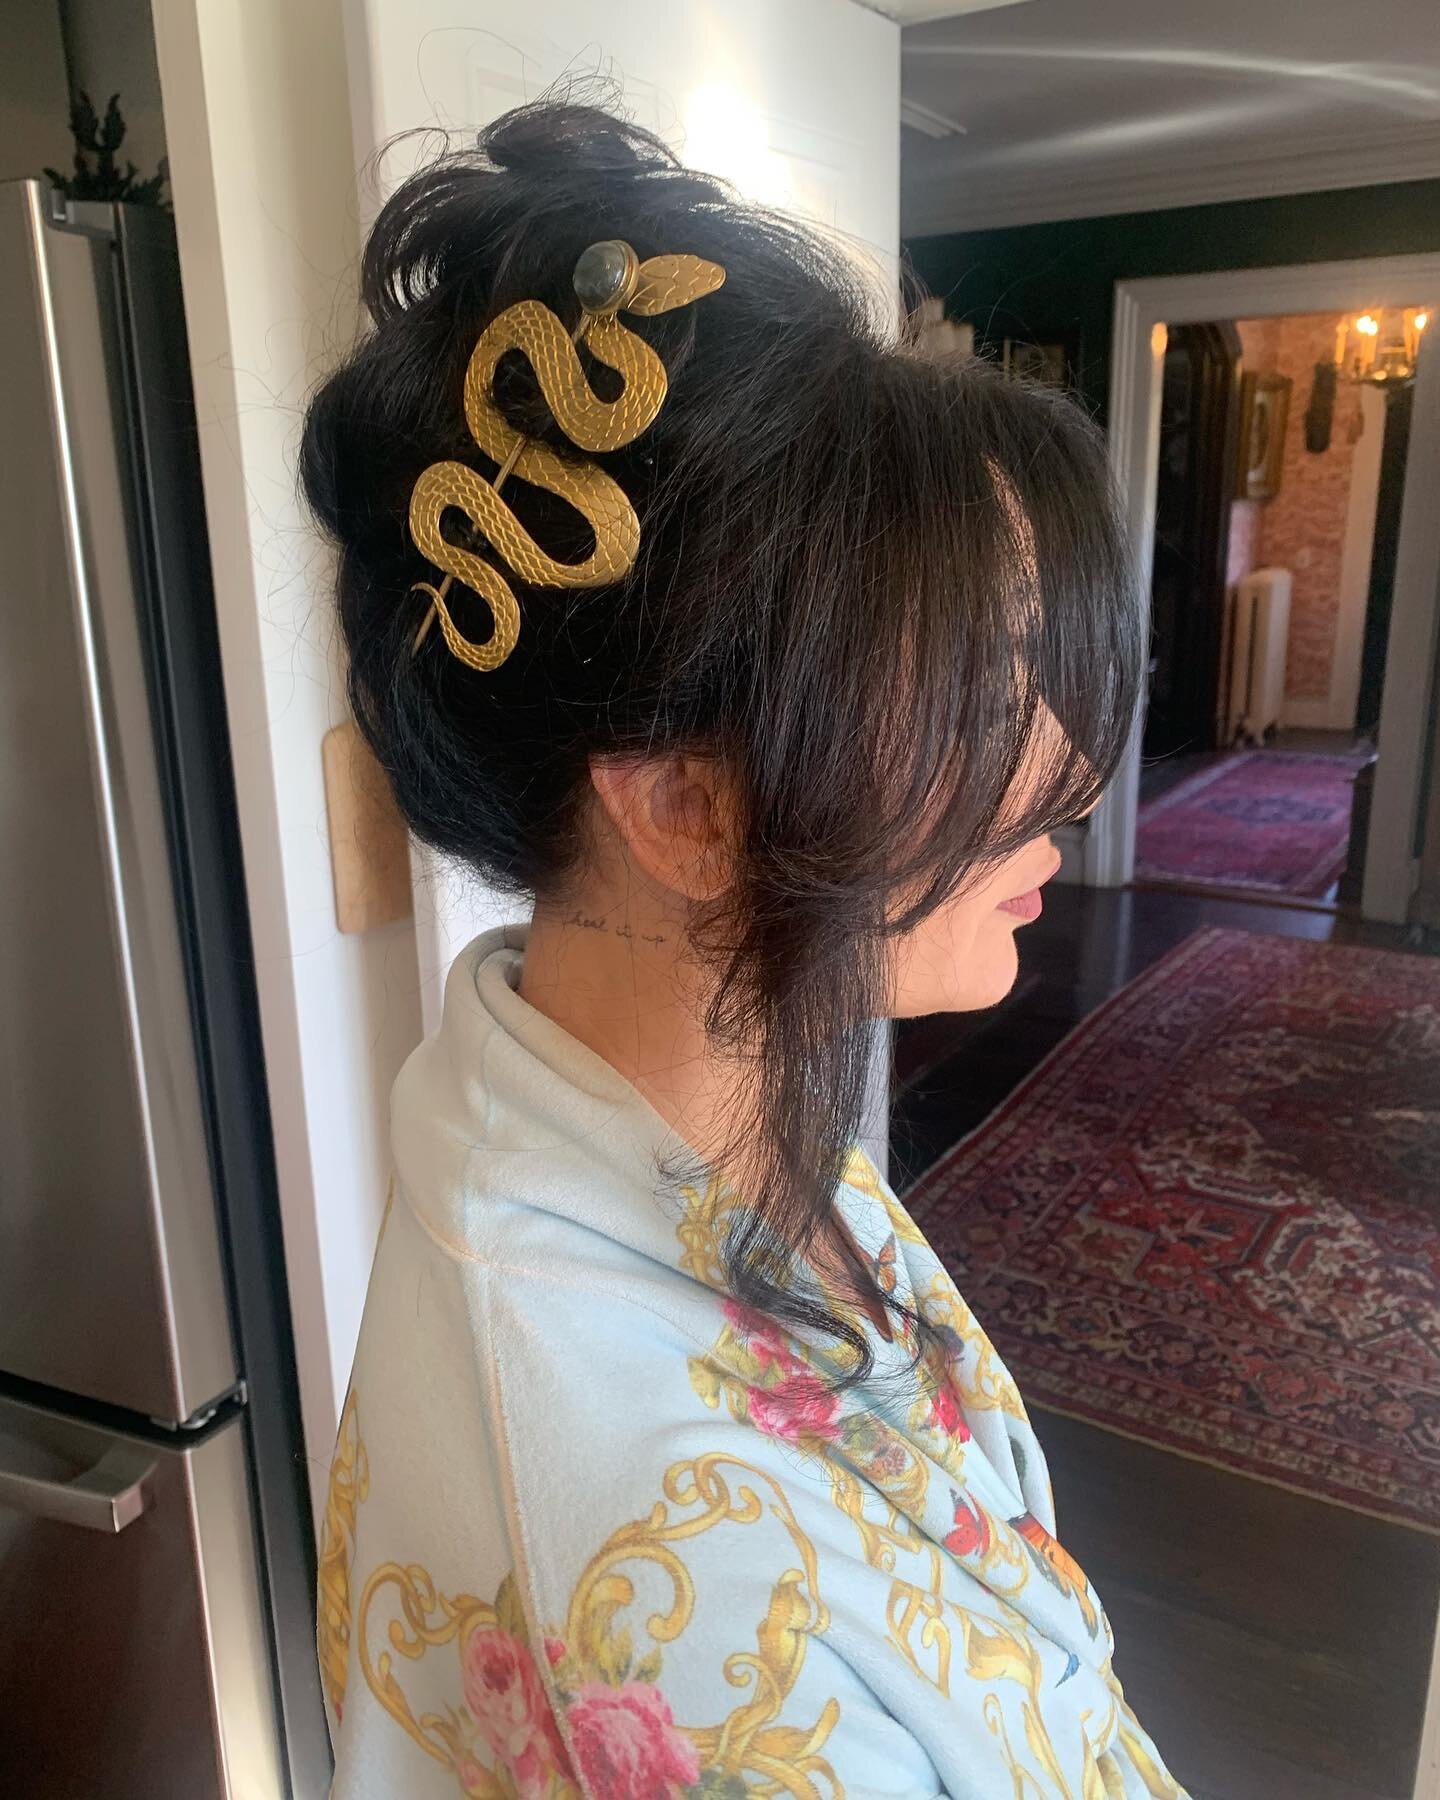 Just a casual #brigittebardot moment for lovely @reginamarierossi - I keep saying it but stay tuned!! Love the creativity she throws. 
.
.
.
#hairbyme #hairpile #highhair #curtainbangs✂️ #currainbangs #cthair #travelstylist #masterstylist #vintagehai